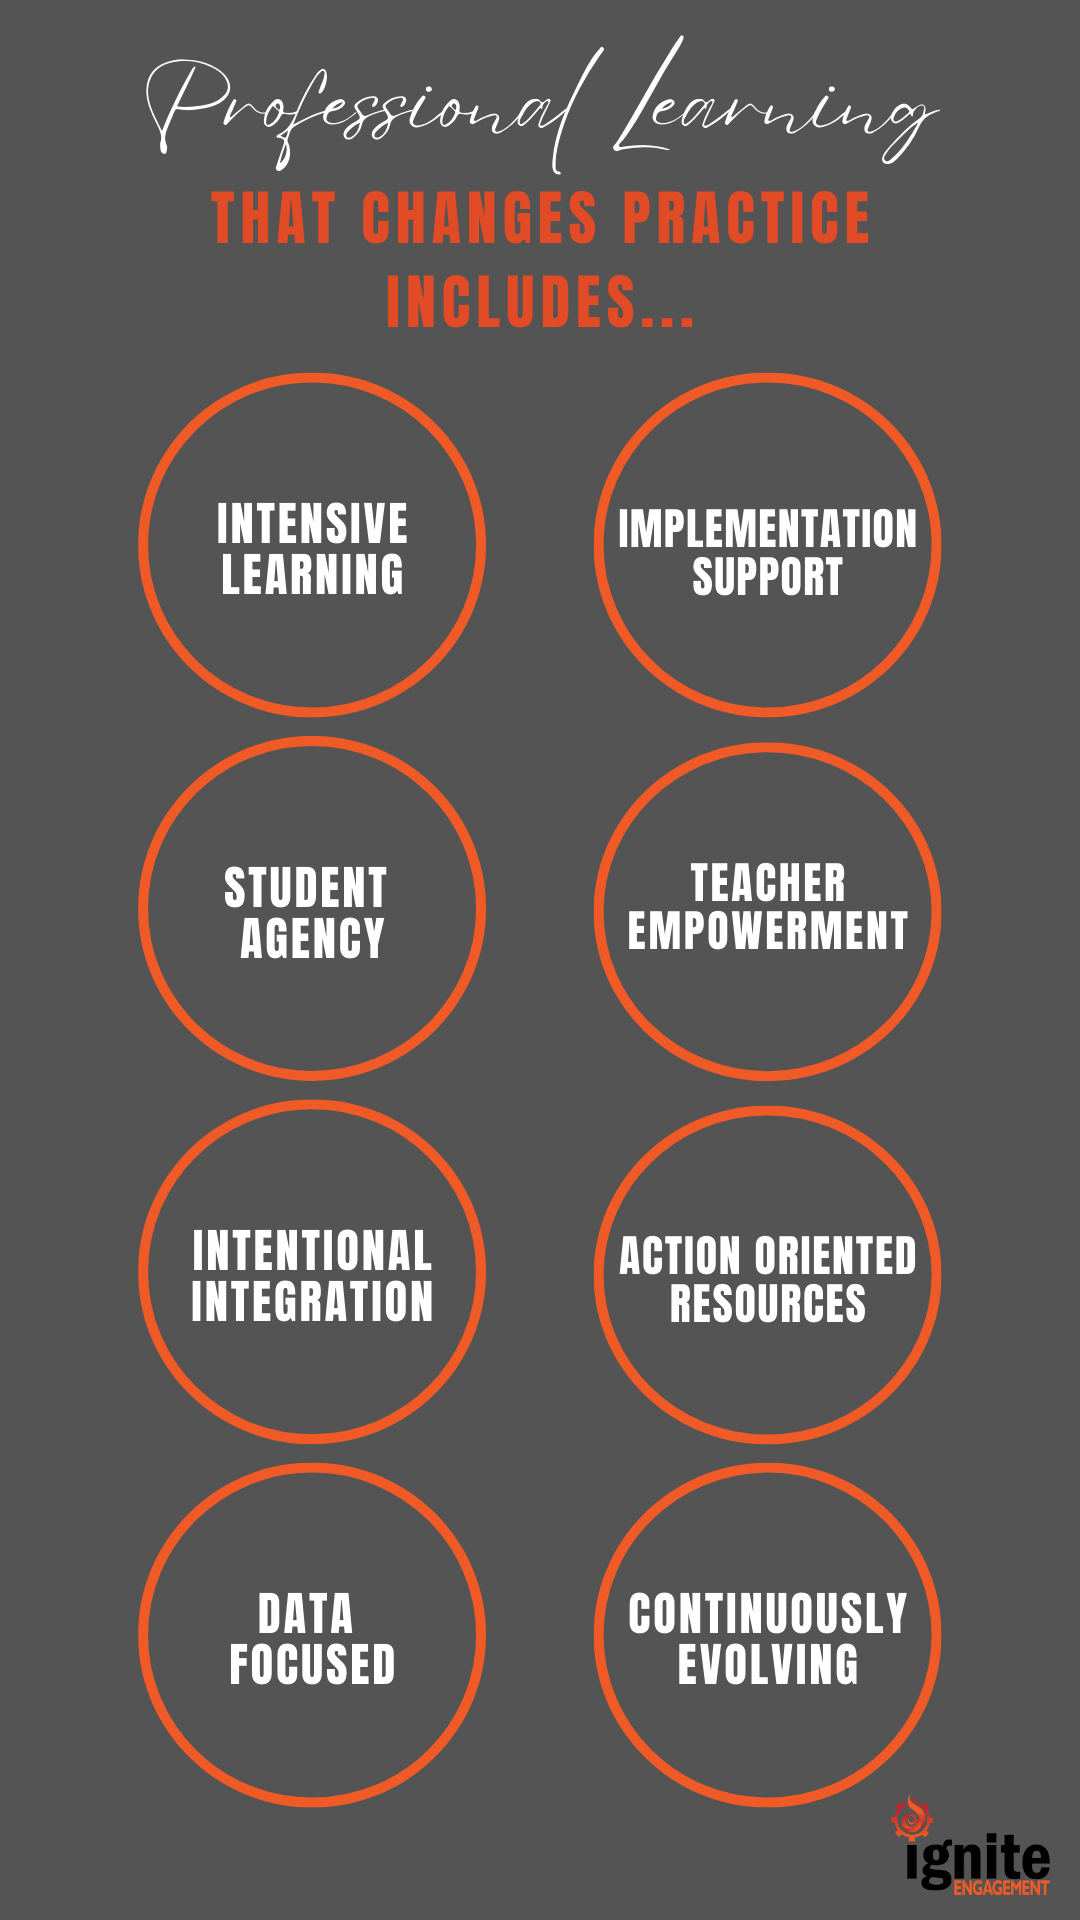 Professional Learning that changes practice...intensive learning, implementation support, student agency, teacher empowerment, intentional integration, action oriented resources, data focused, continuously evolving ignite engagement